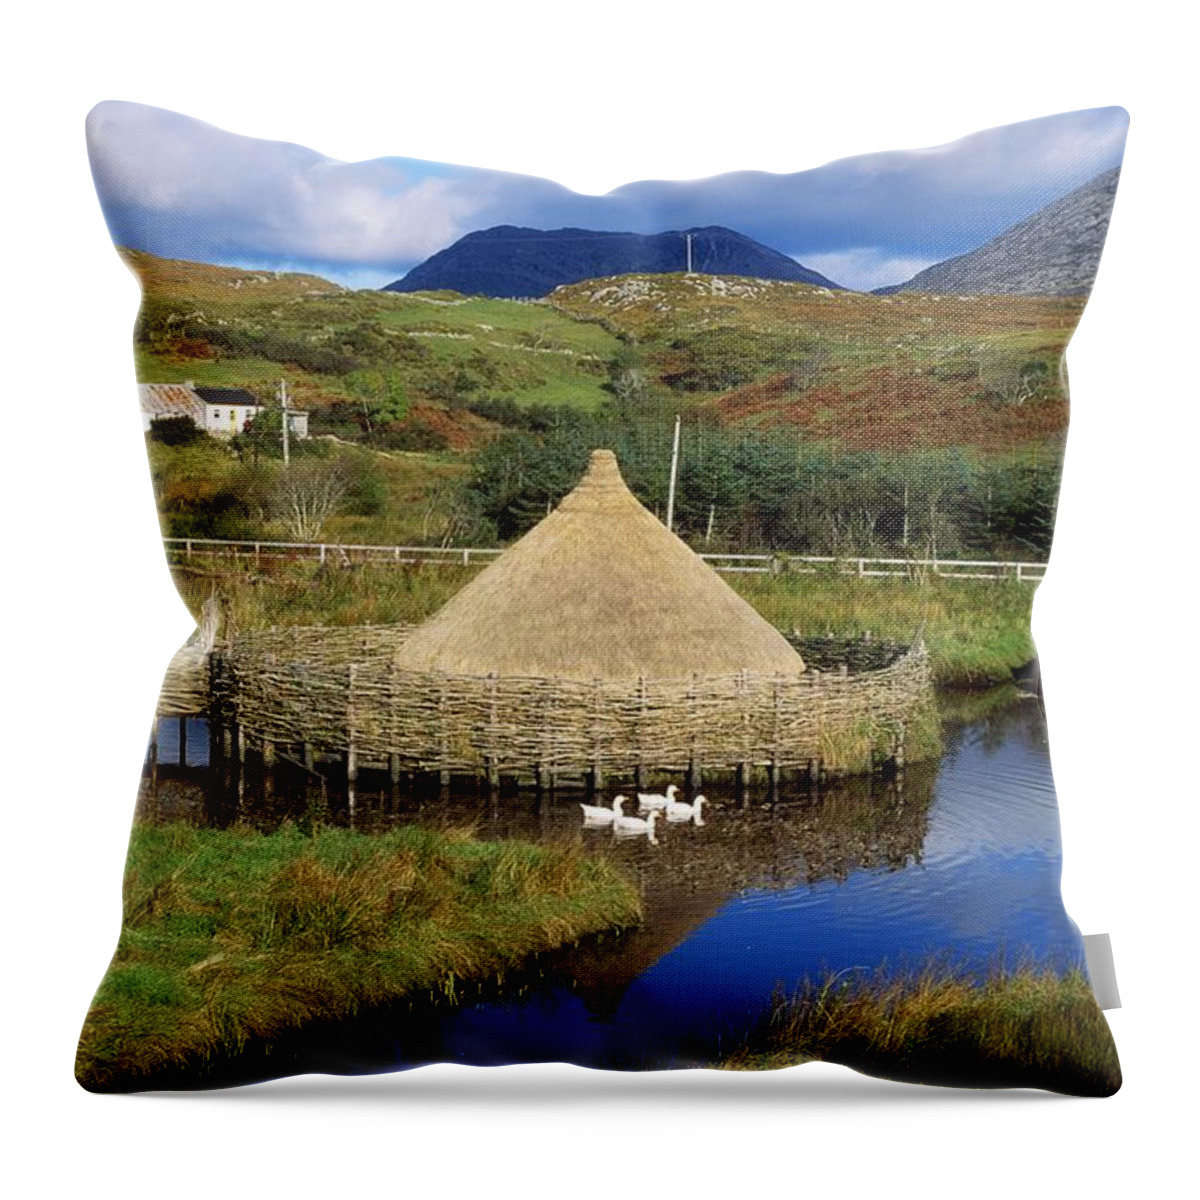 Building Throw Pillow featuring the photograph Connemara Heritage And History Centre by The Irish Image Collection 